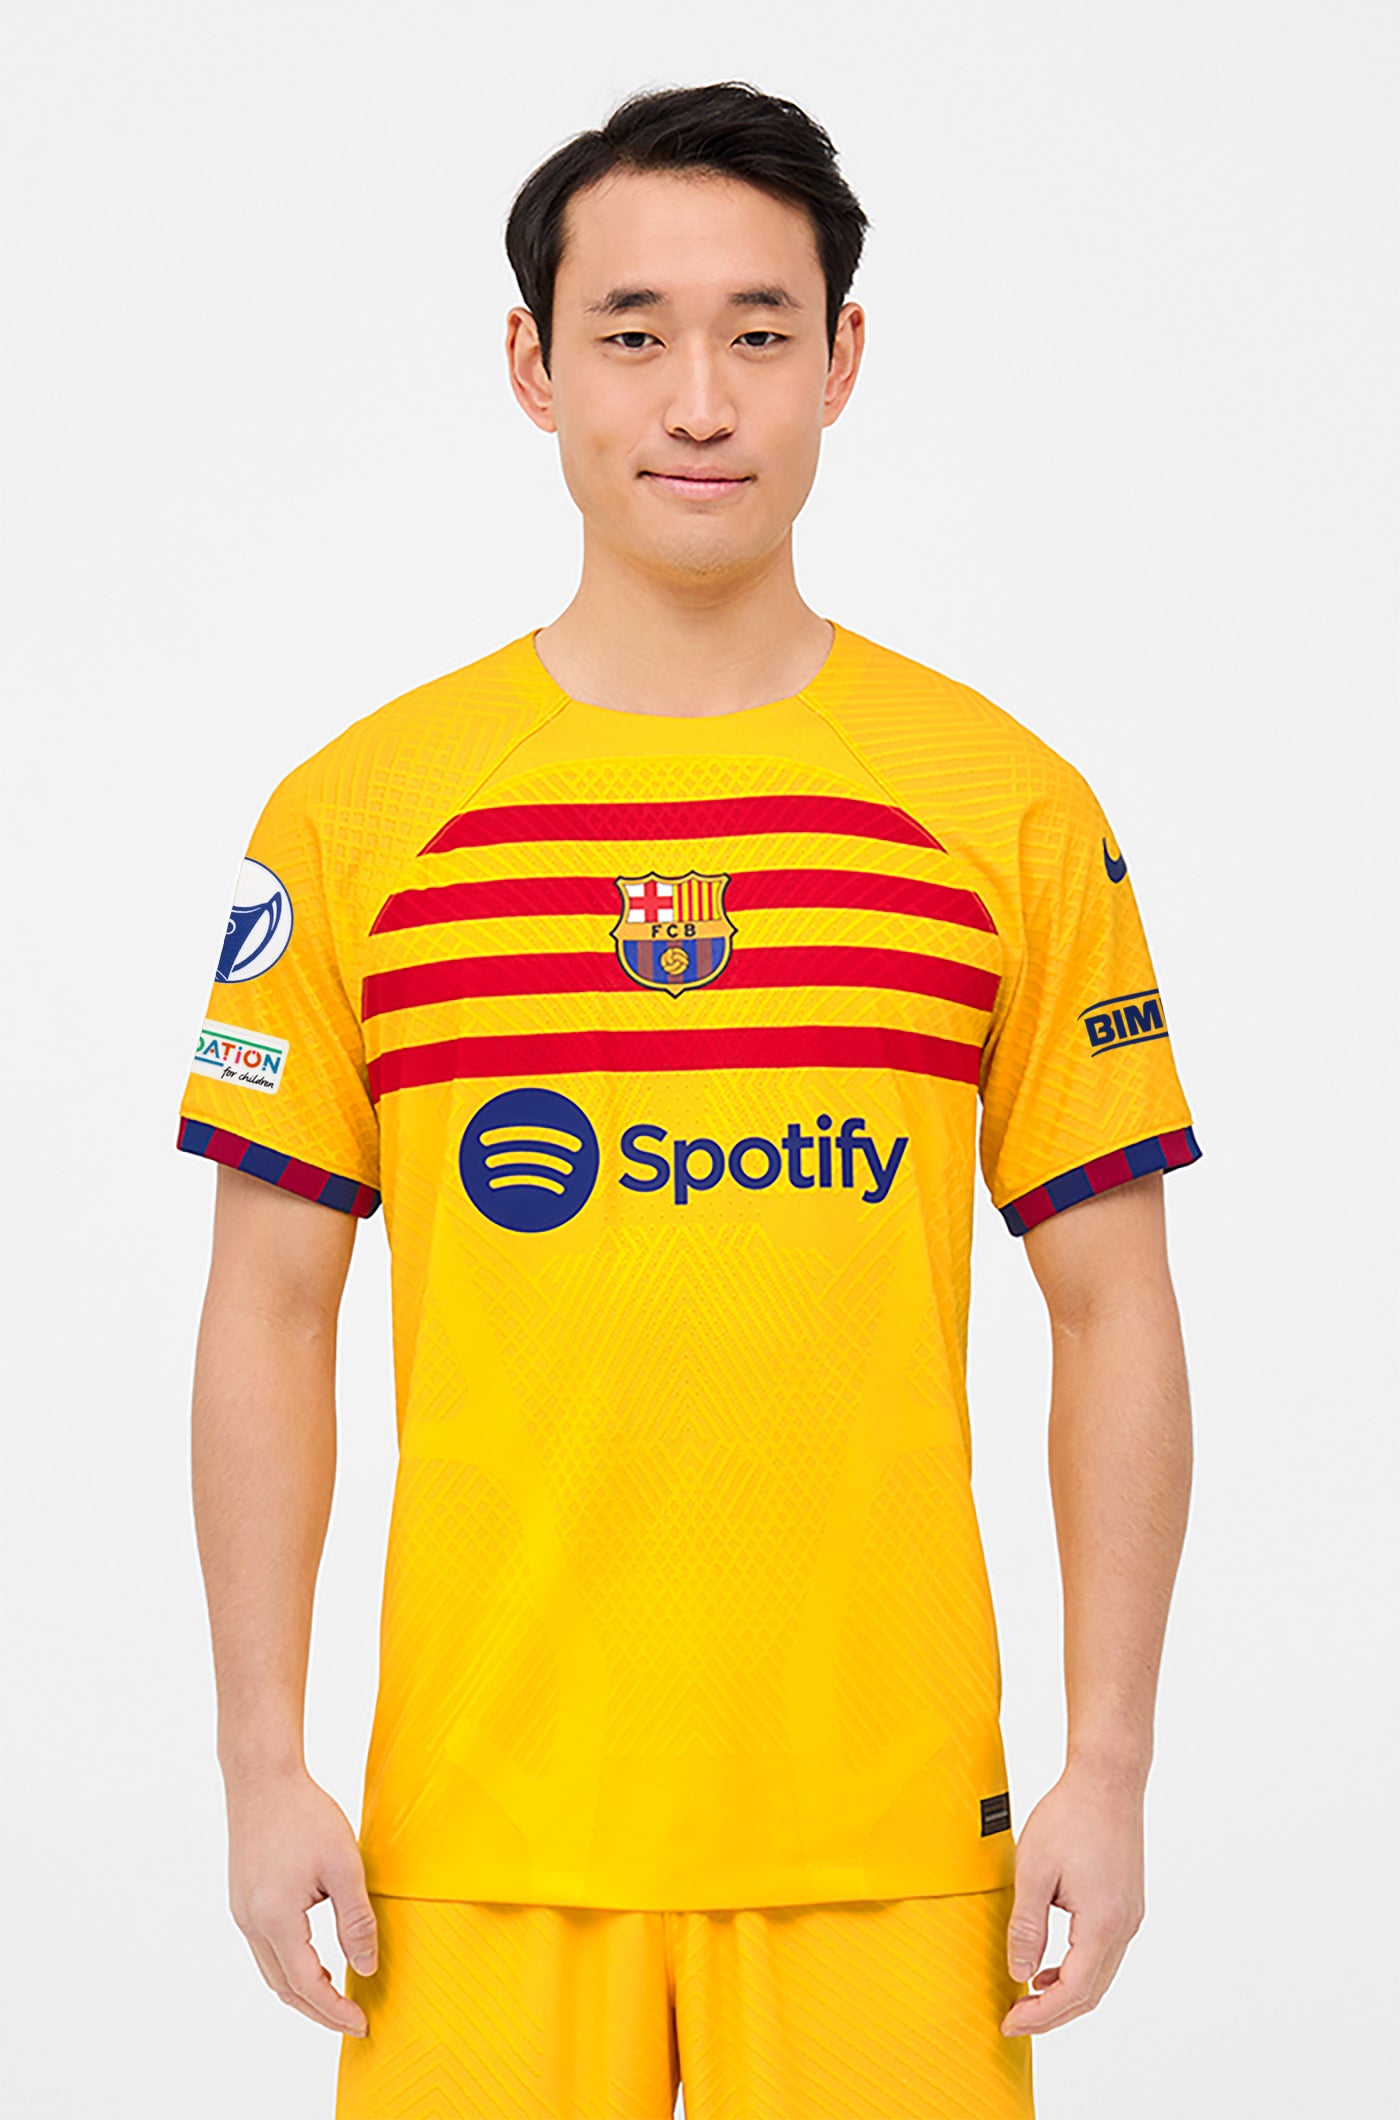 UWCL FC Barcelona fourth shirt 23/24 Player's Edition - MARIONA